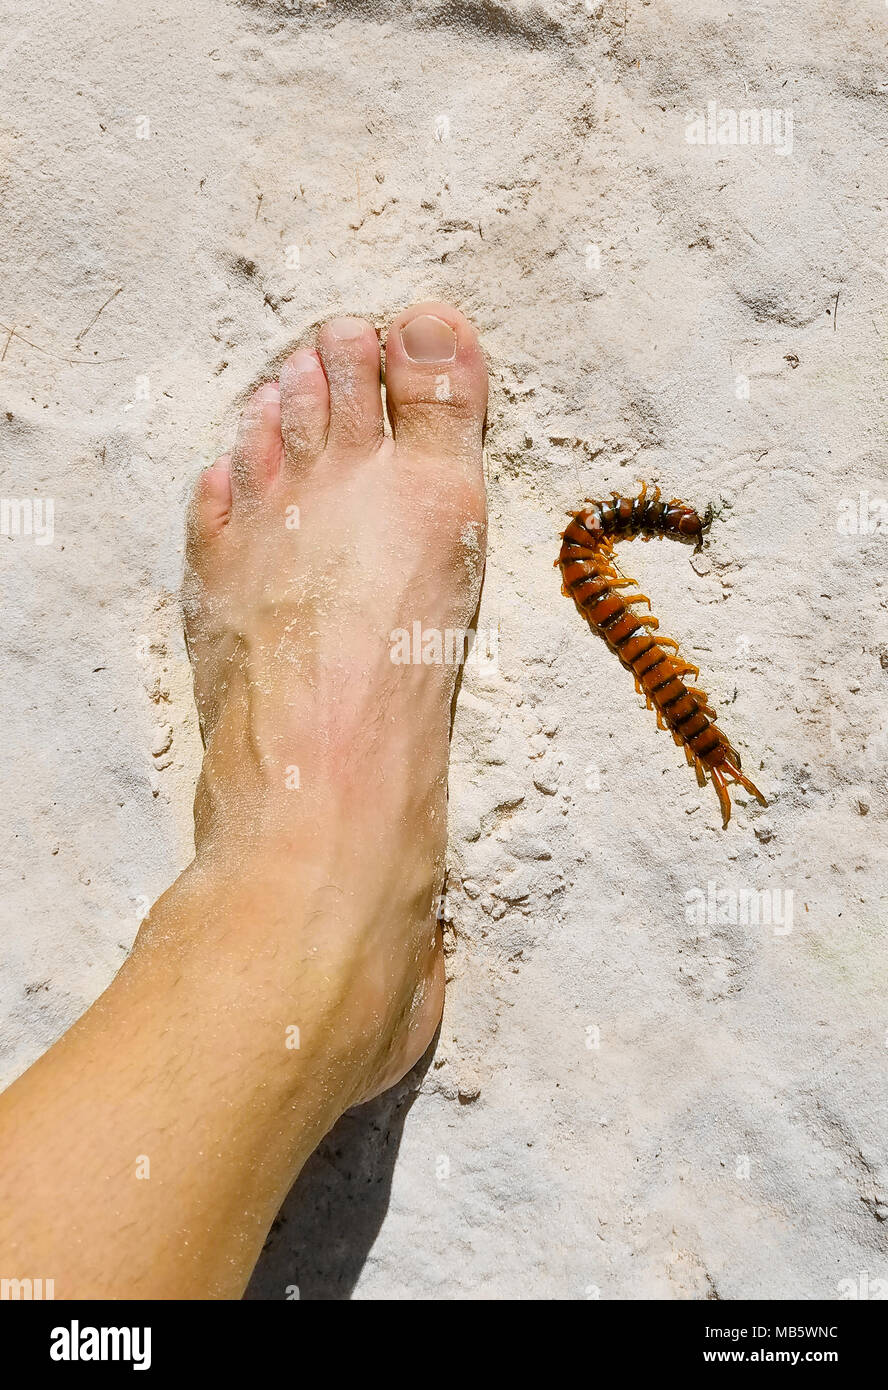 Peruvian giant yellow-leg centipede, or or Amazonian giant centipede, Scolopendra gigantea, compared to a man's foot size 10.5 US, or 43 EU, or 10 UK. Stock Photo